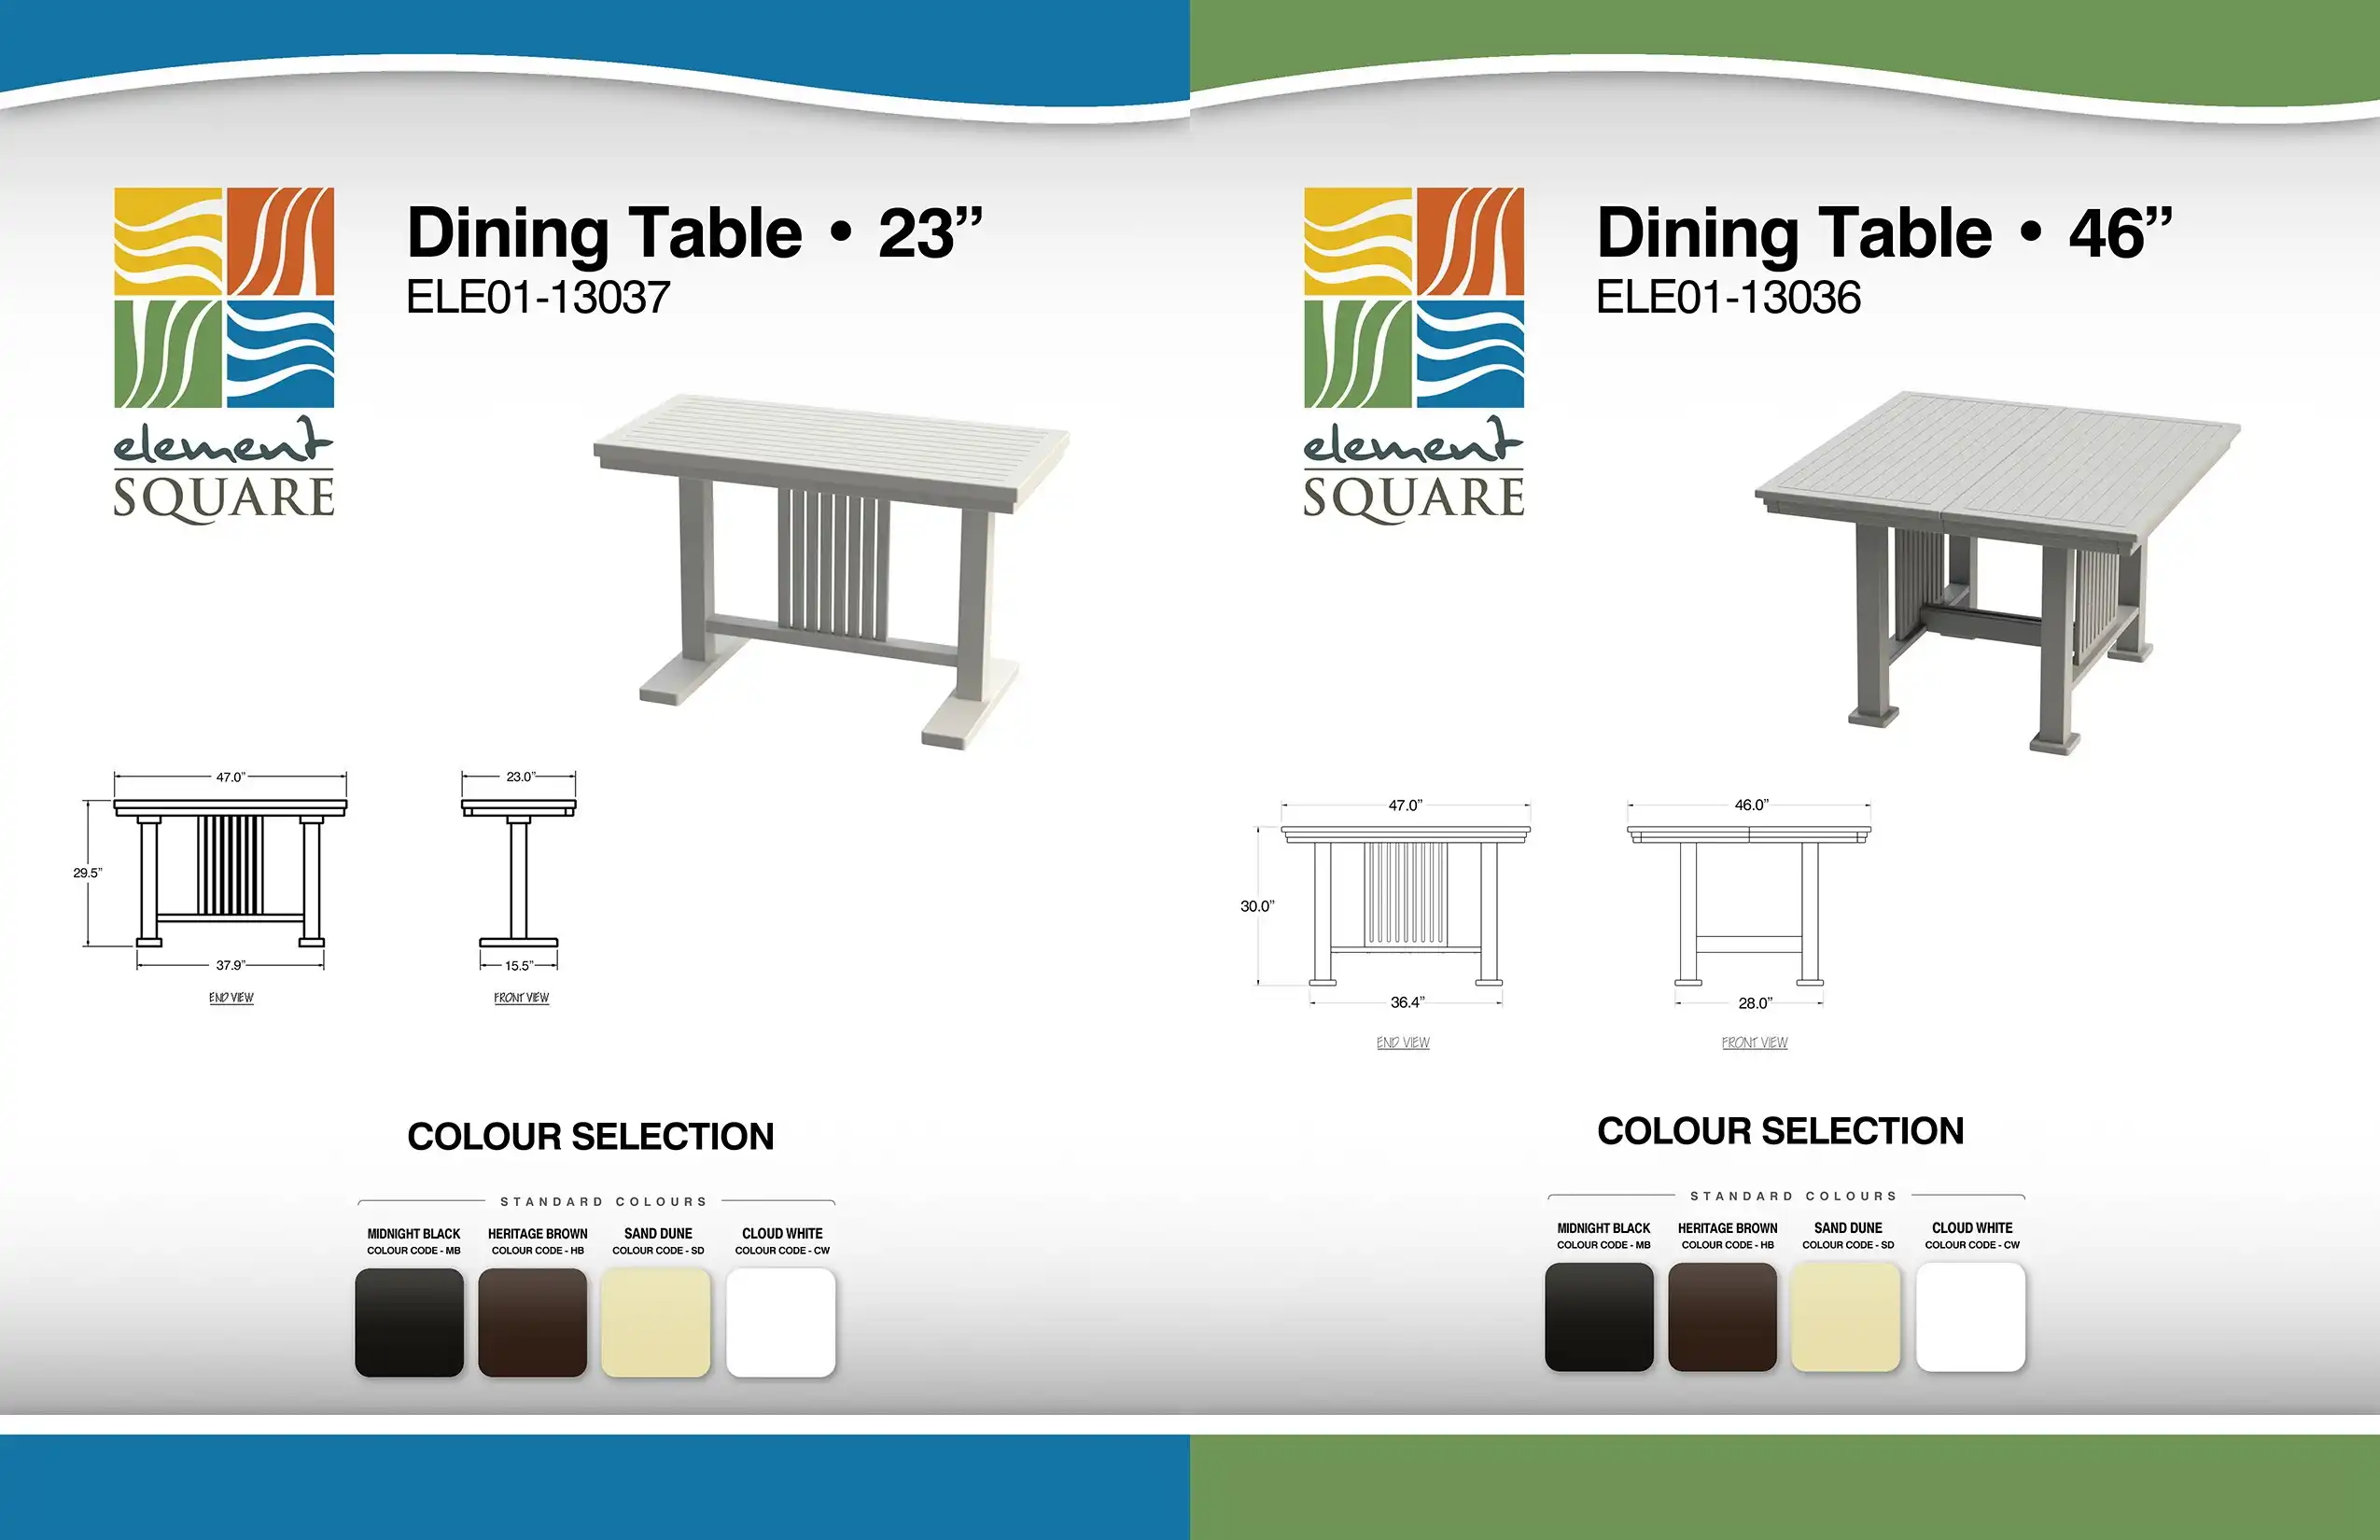 23 in & 46 in DINING TABLEs by Element Square